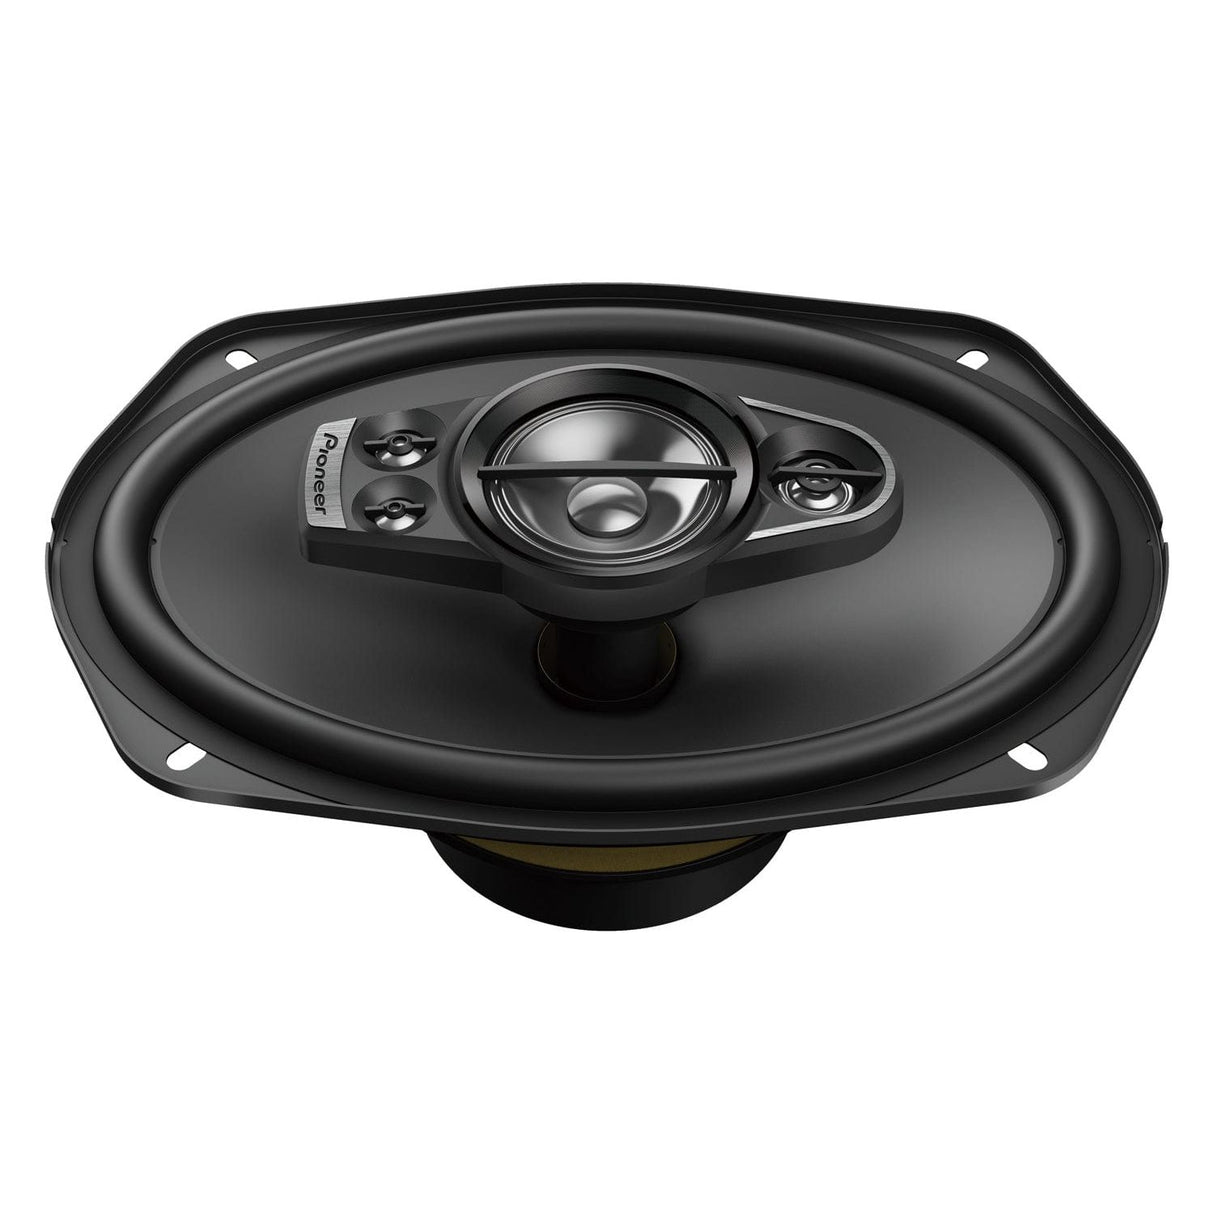 Pioneer Pioneer Pioneer TS-A6990F 700W 6x9" 5-Way Coaxial Speaker System with Grills